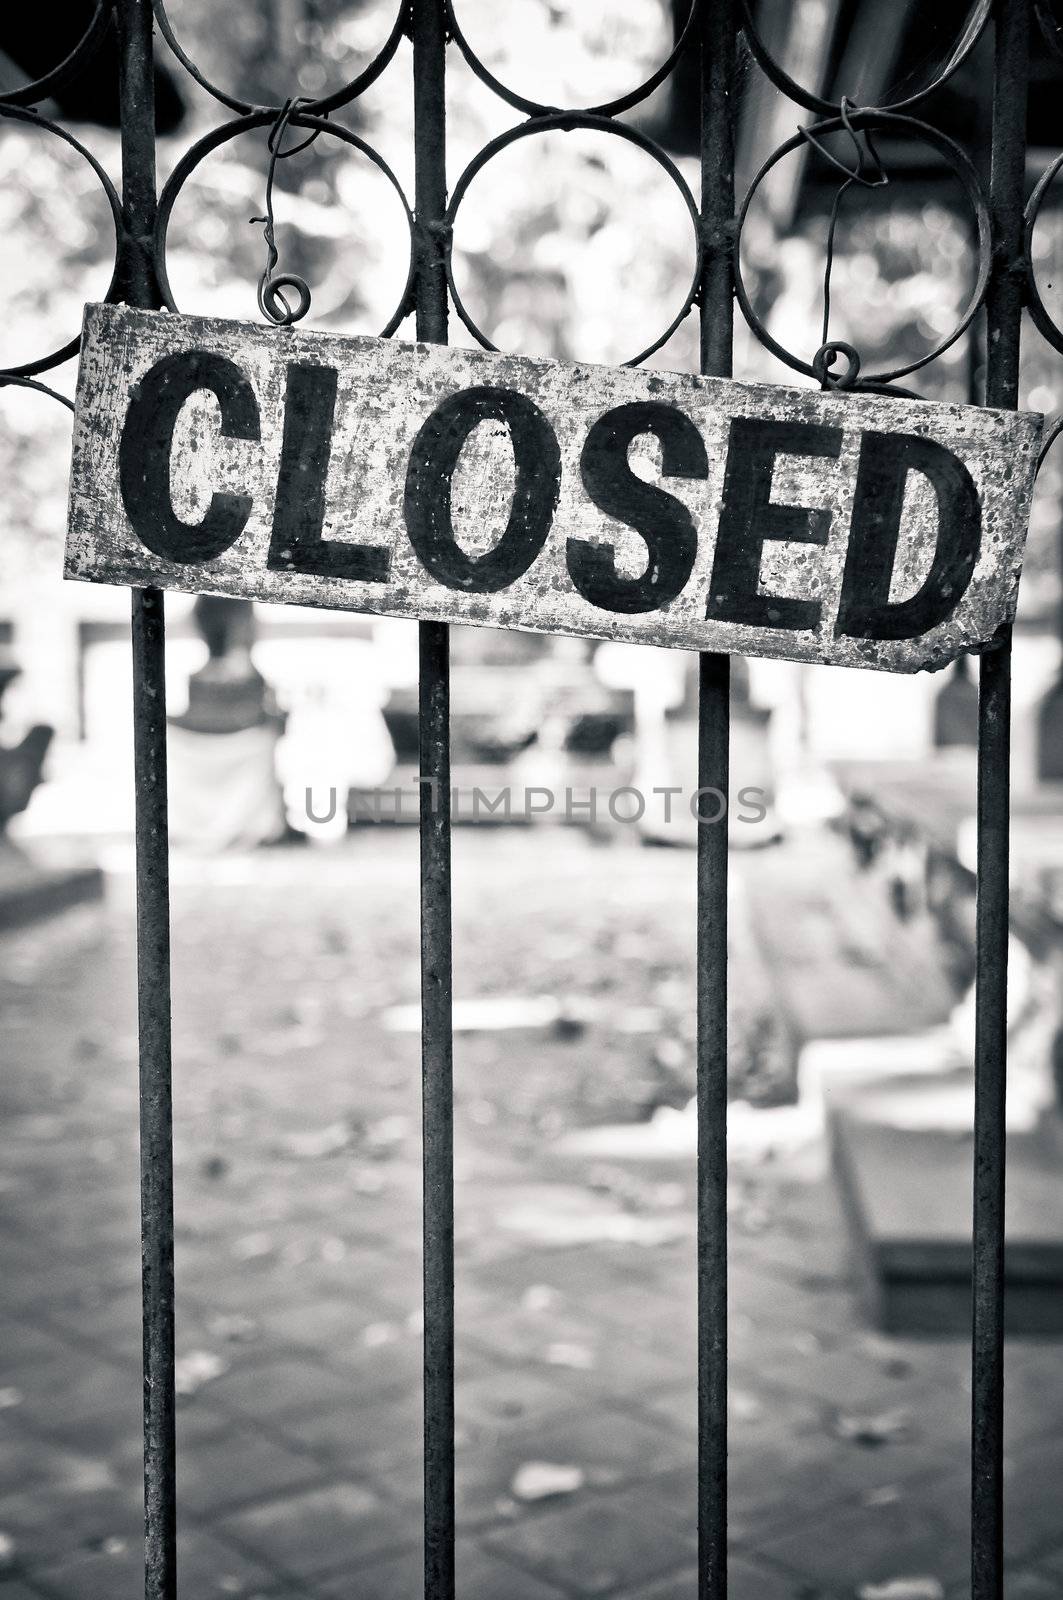 Monochrome closed sign on metal bars of the gate